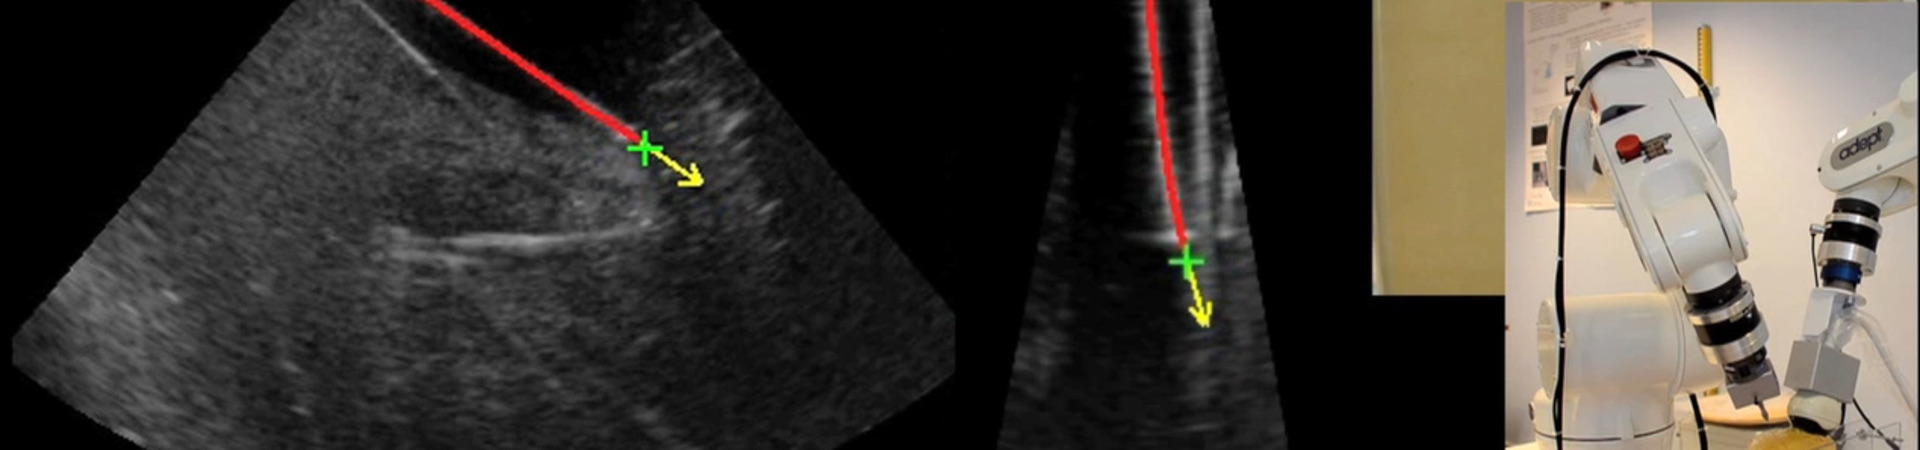 Needdle tracking in ultrasound images